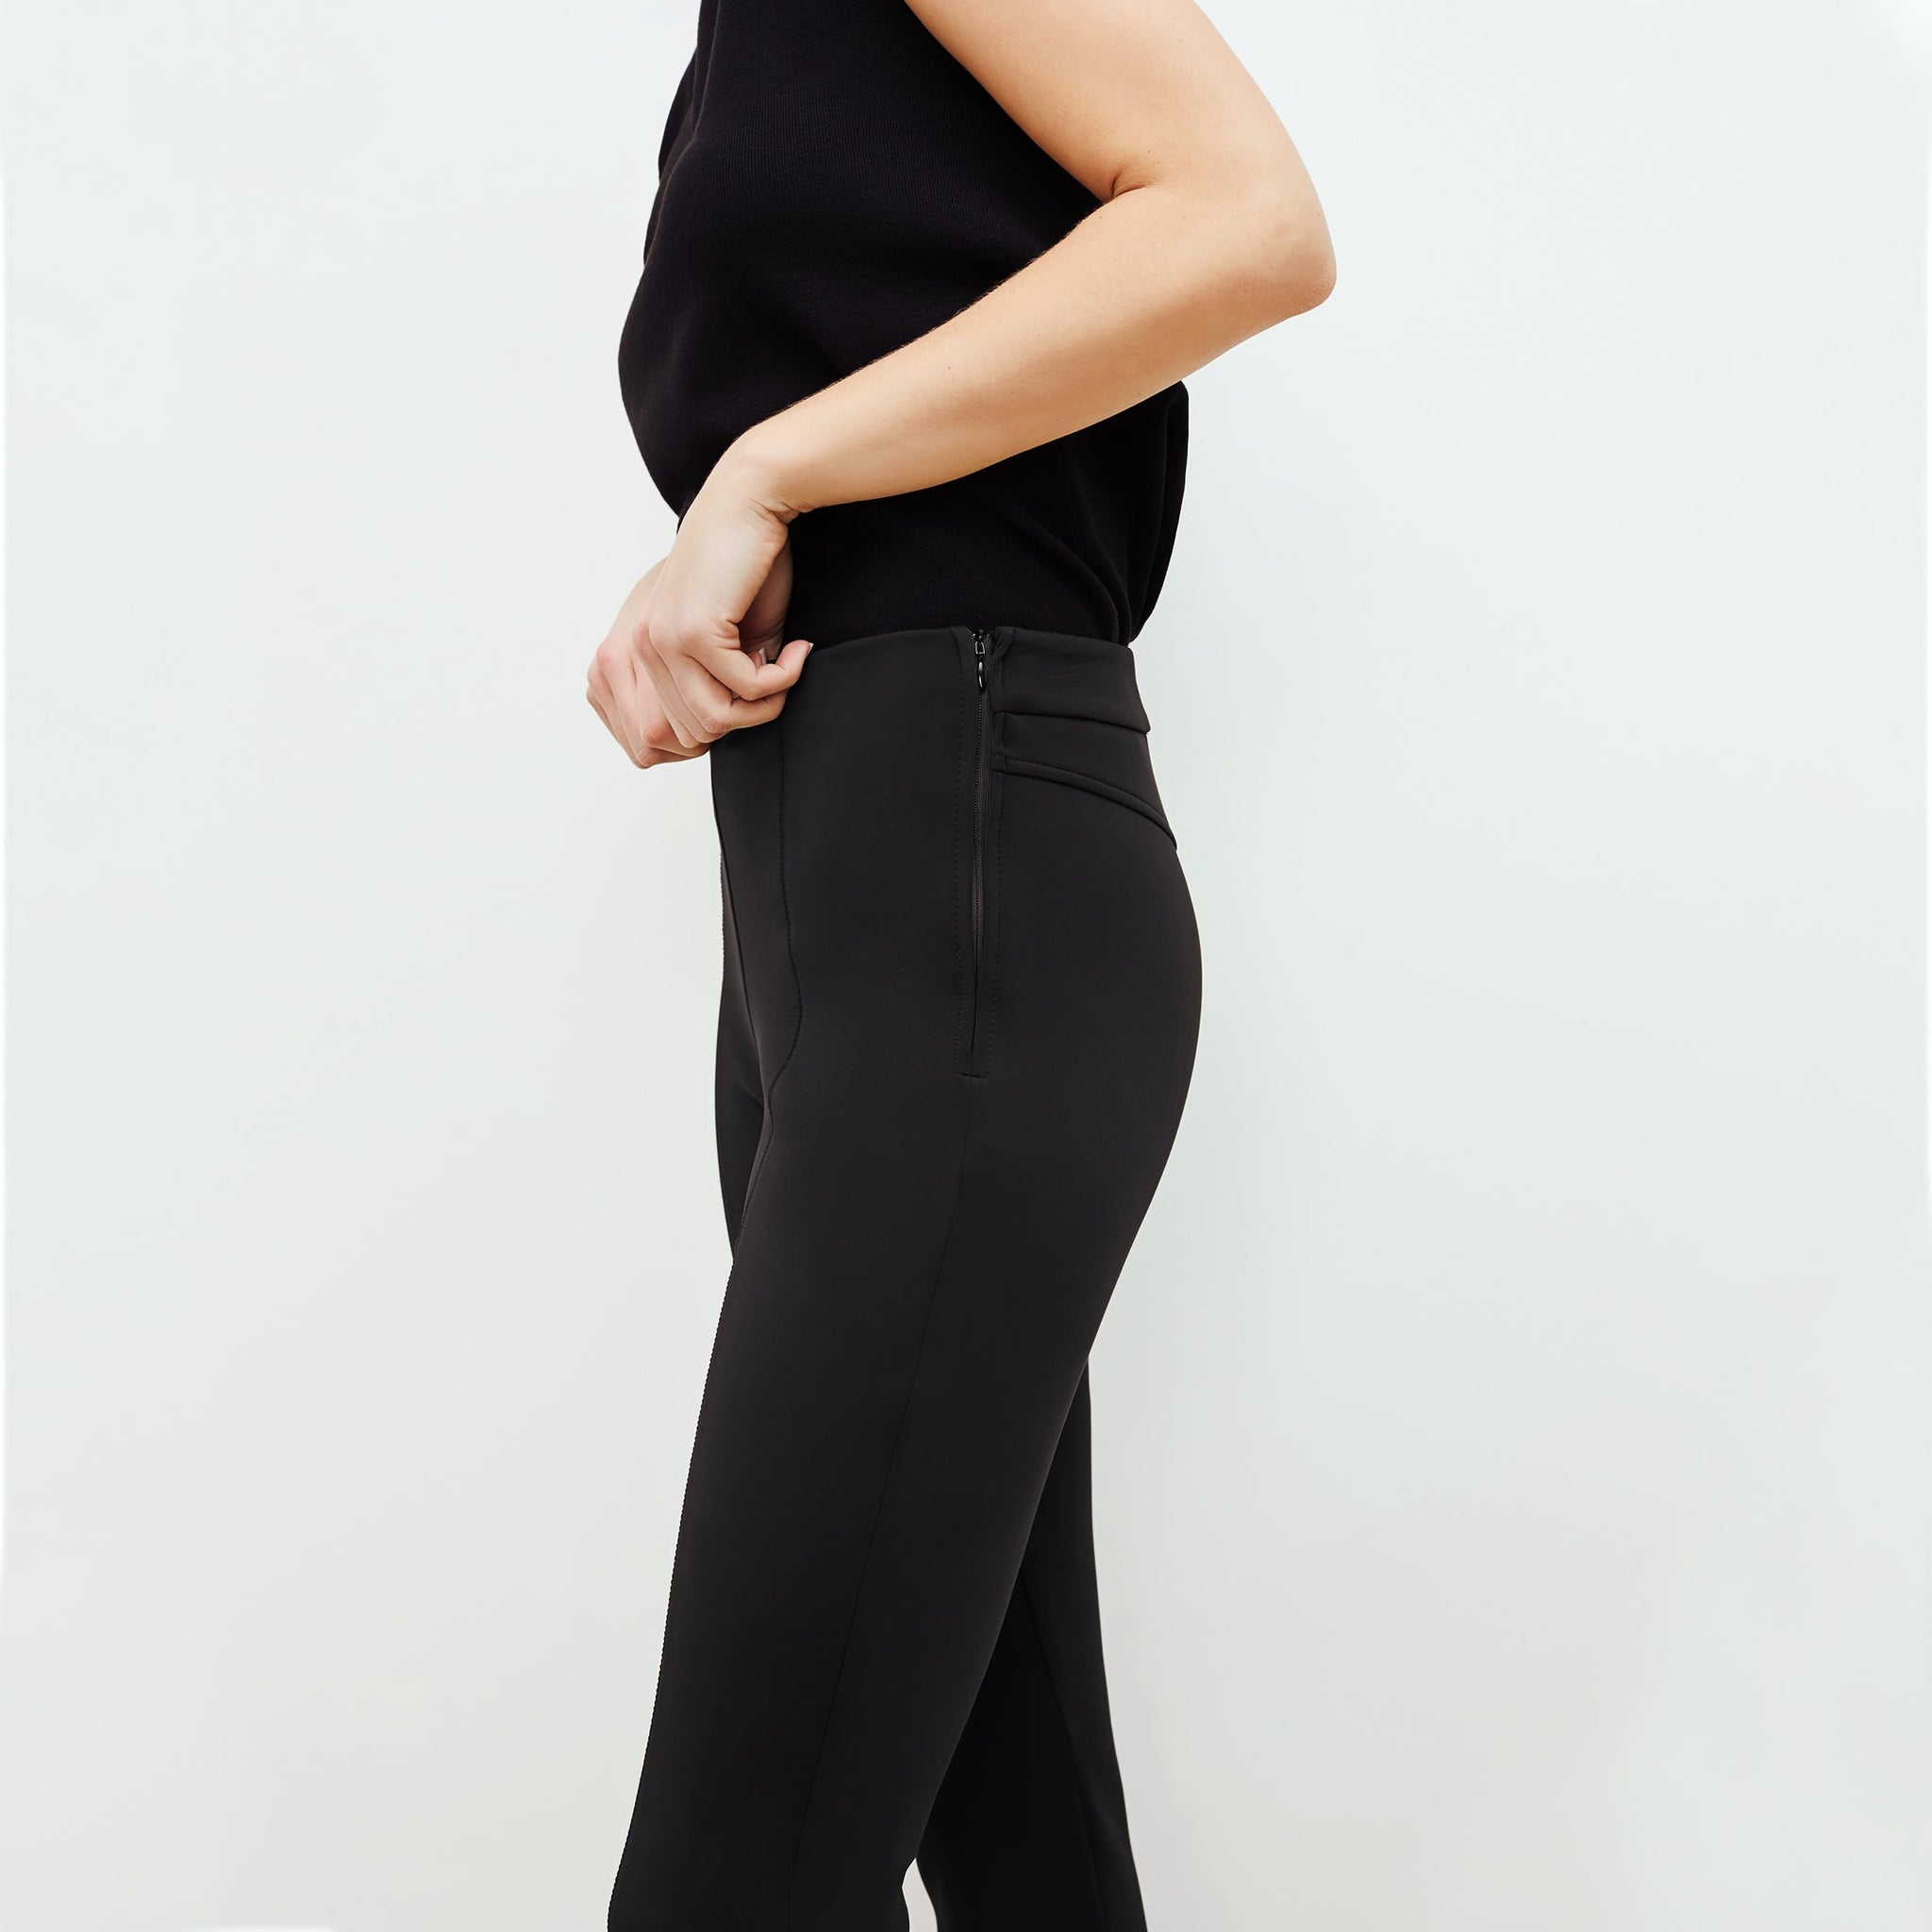 image of a woman wearing the shaw pant in black